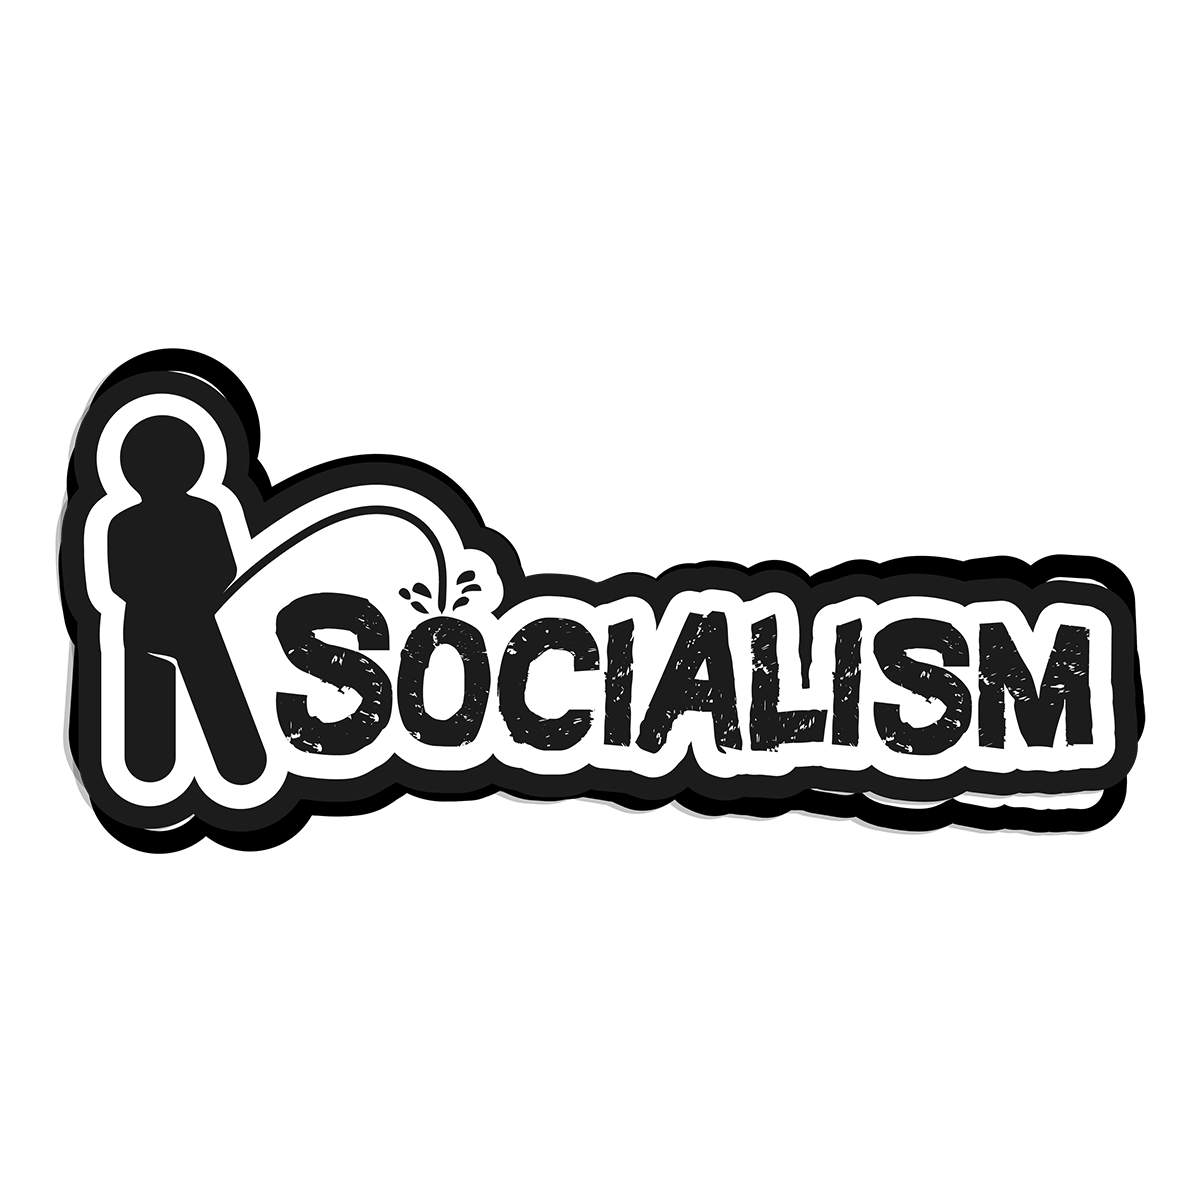 "Pissing On Socialism" - Decal